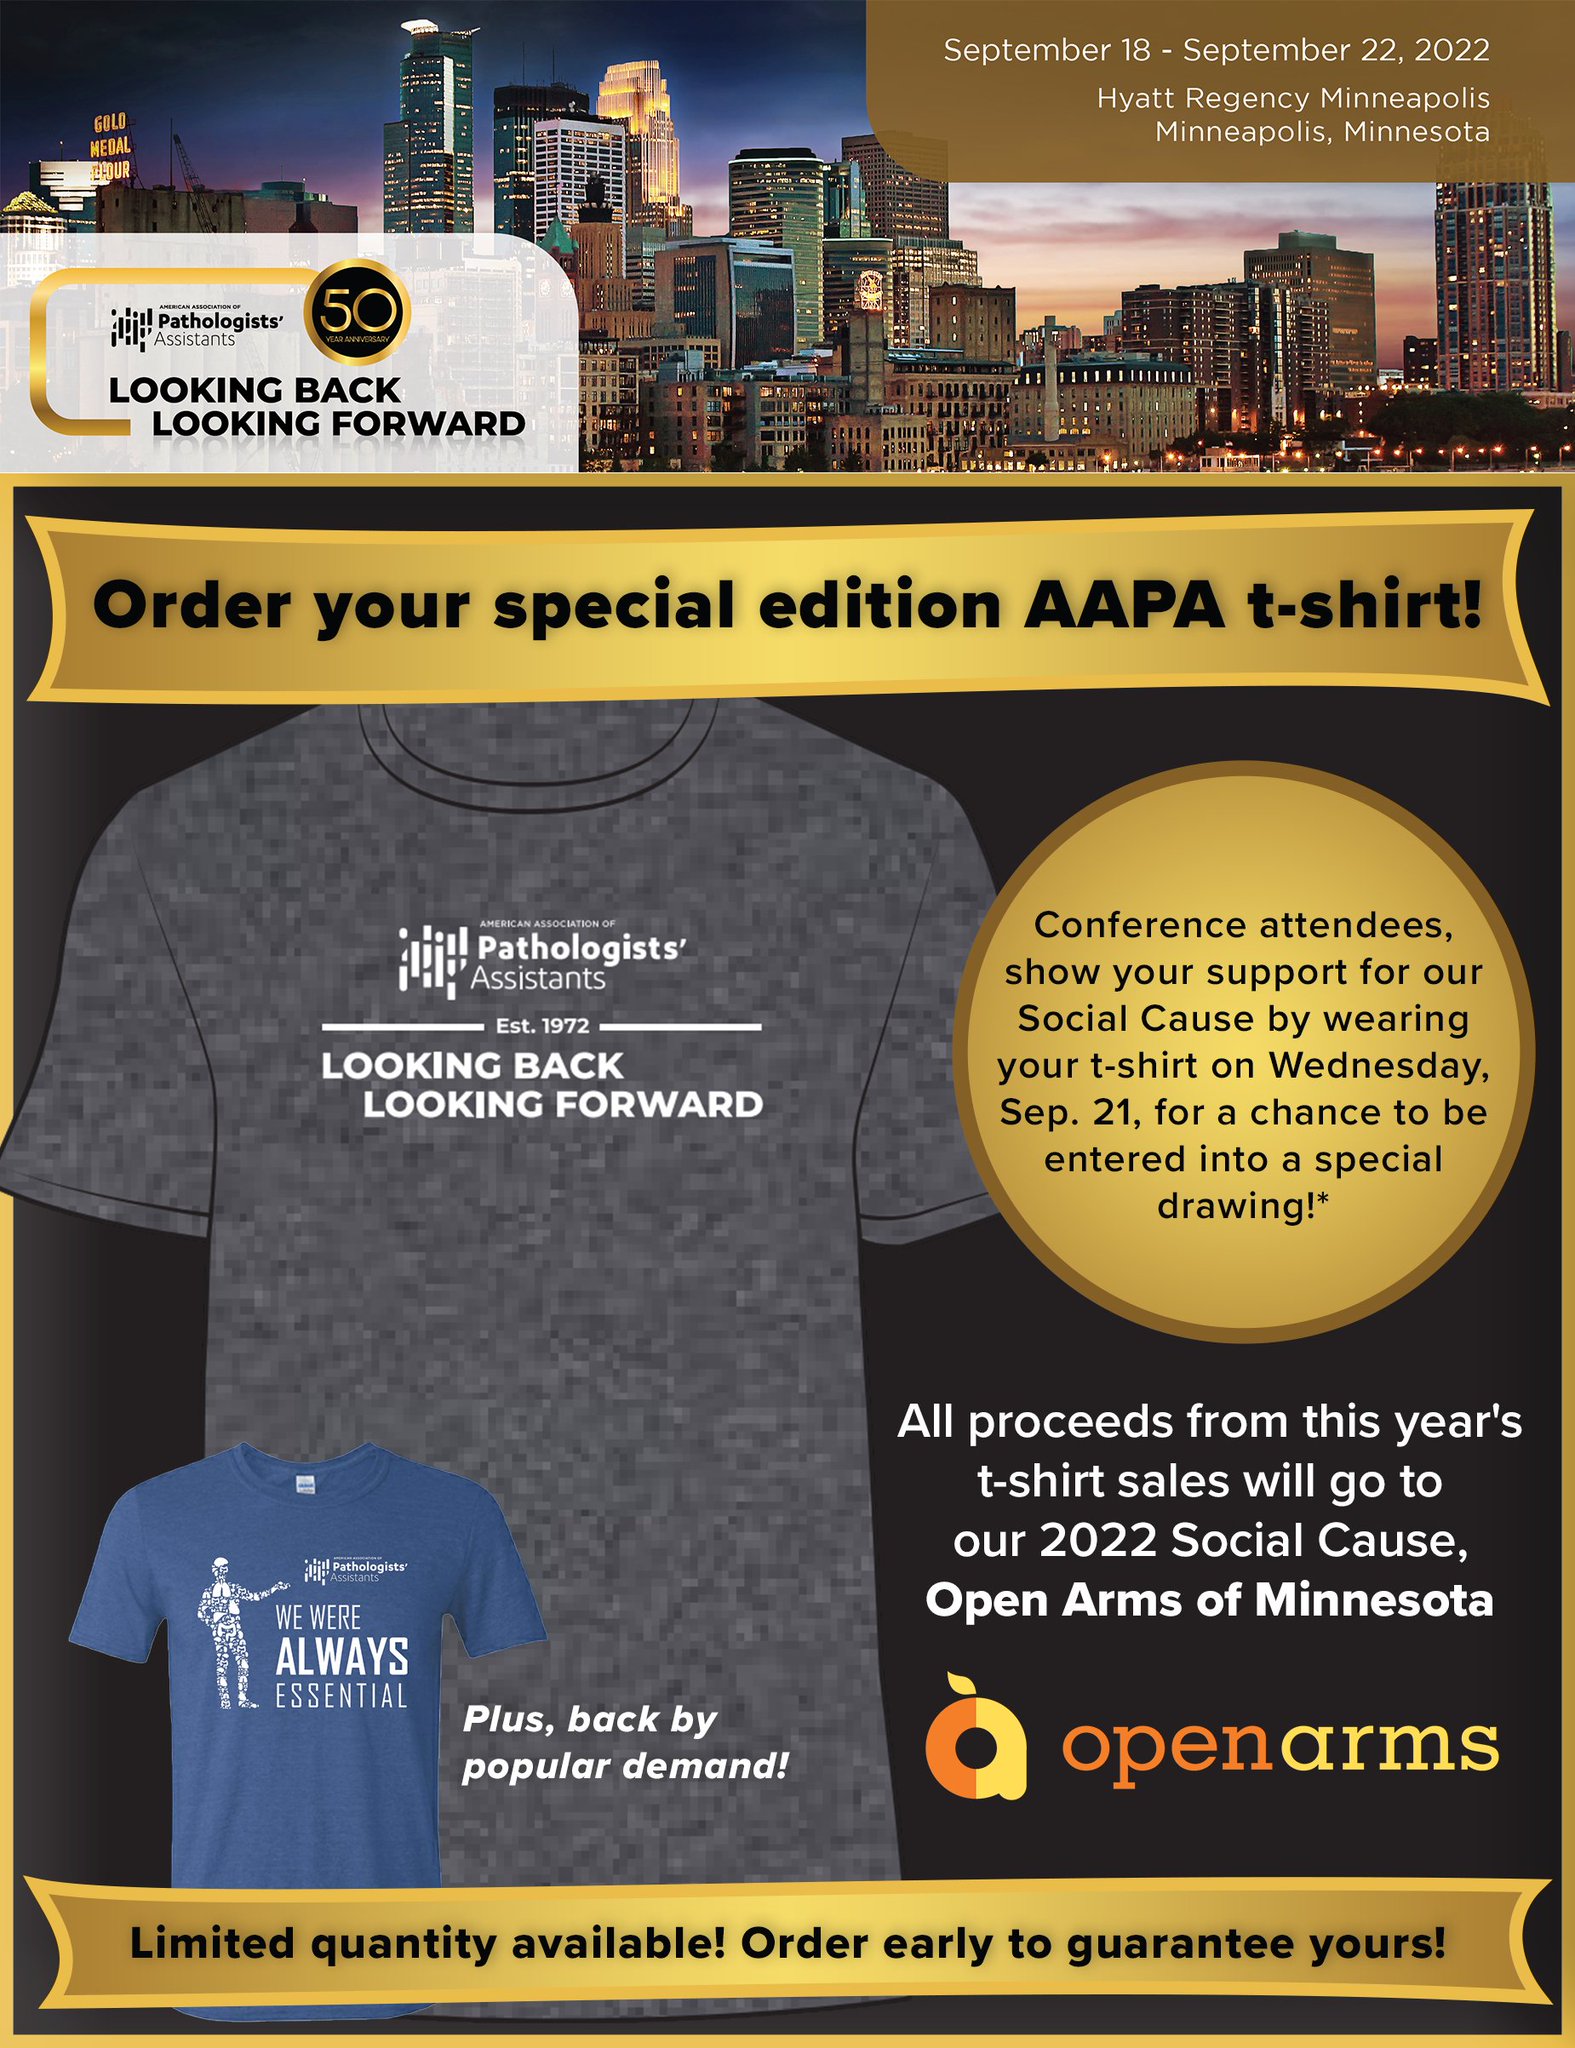 AAPA on Twitter "Limited edition AAPA50 tshirts are now available